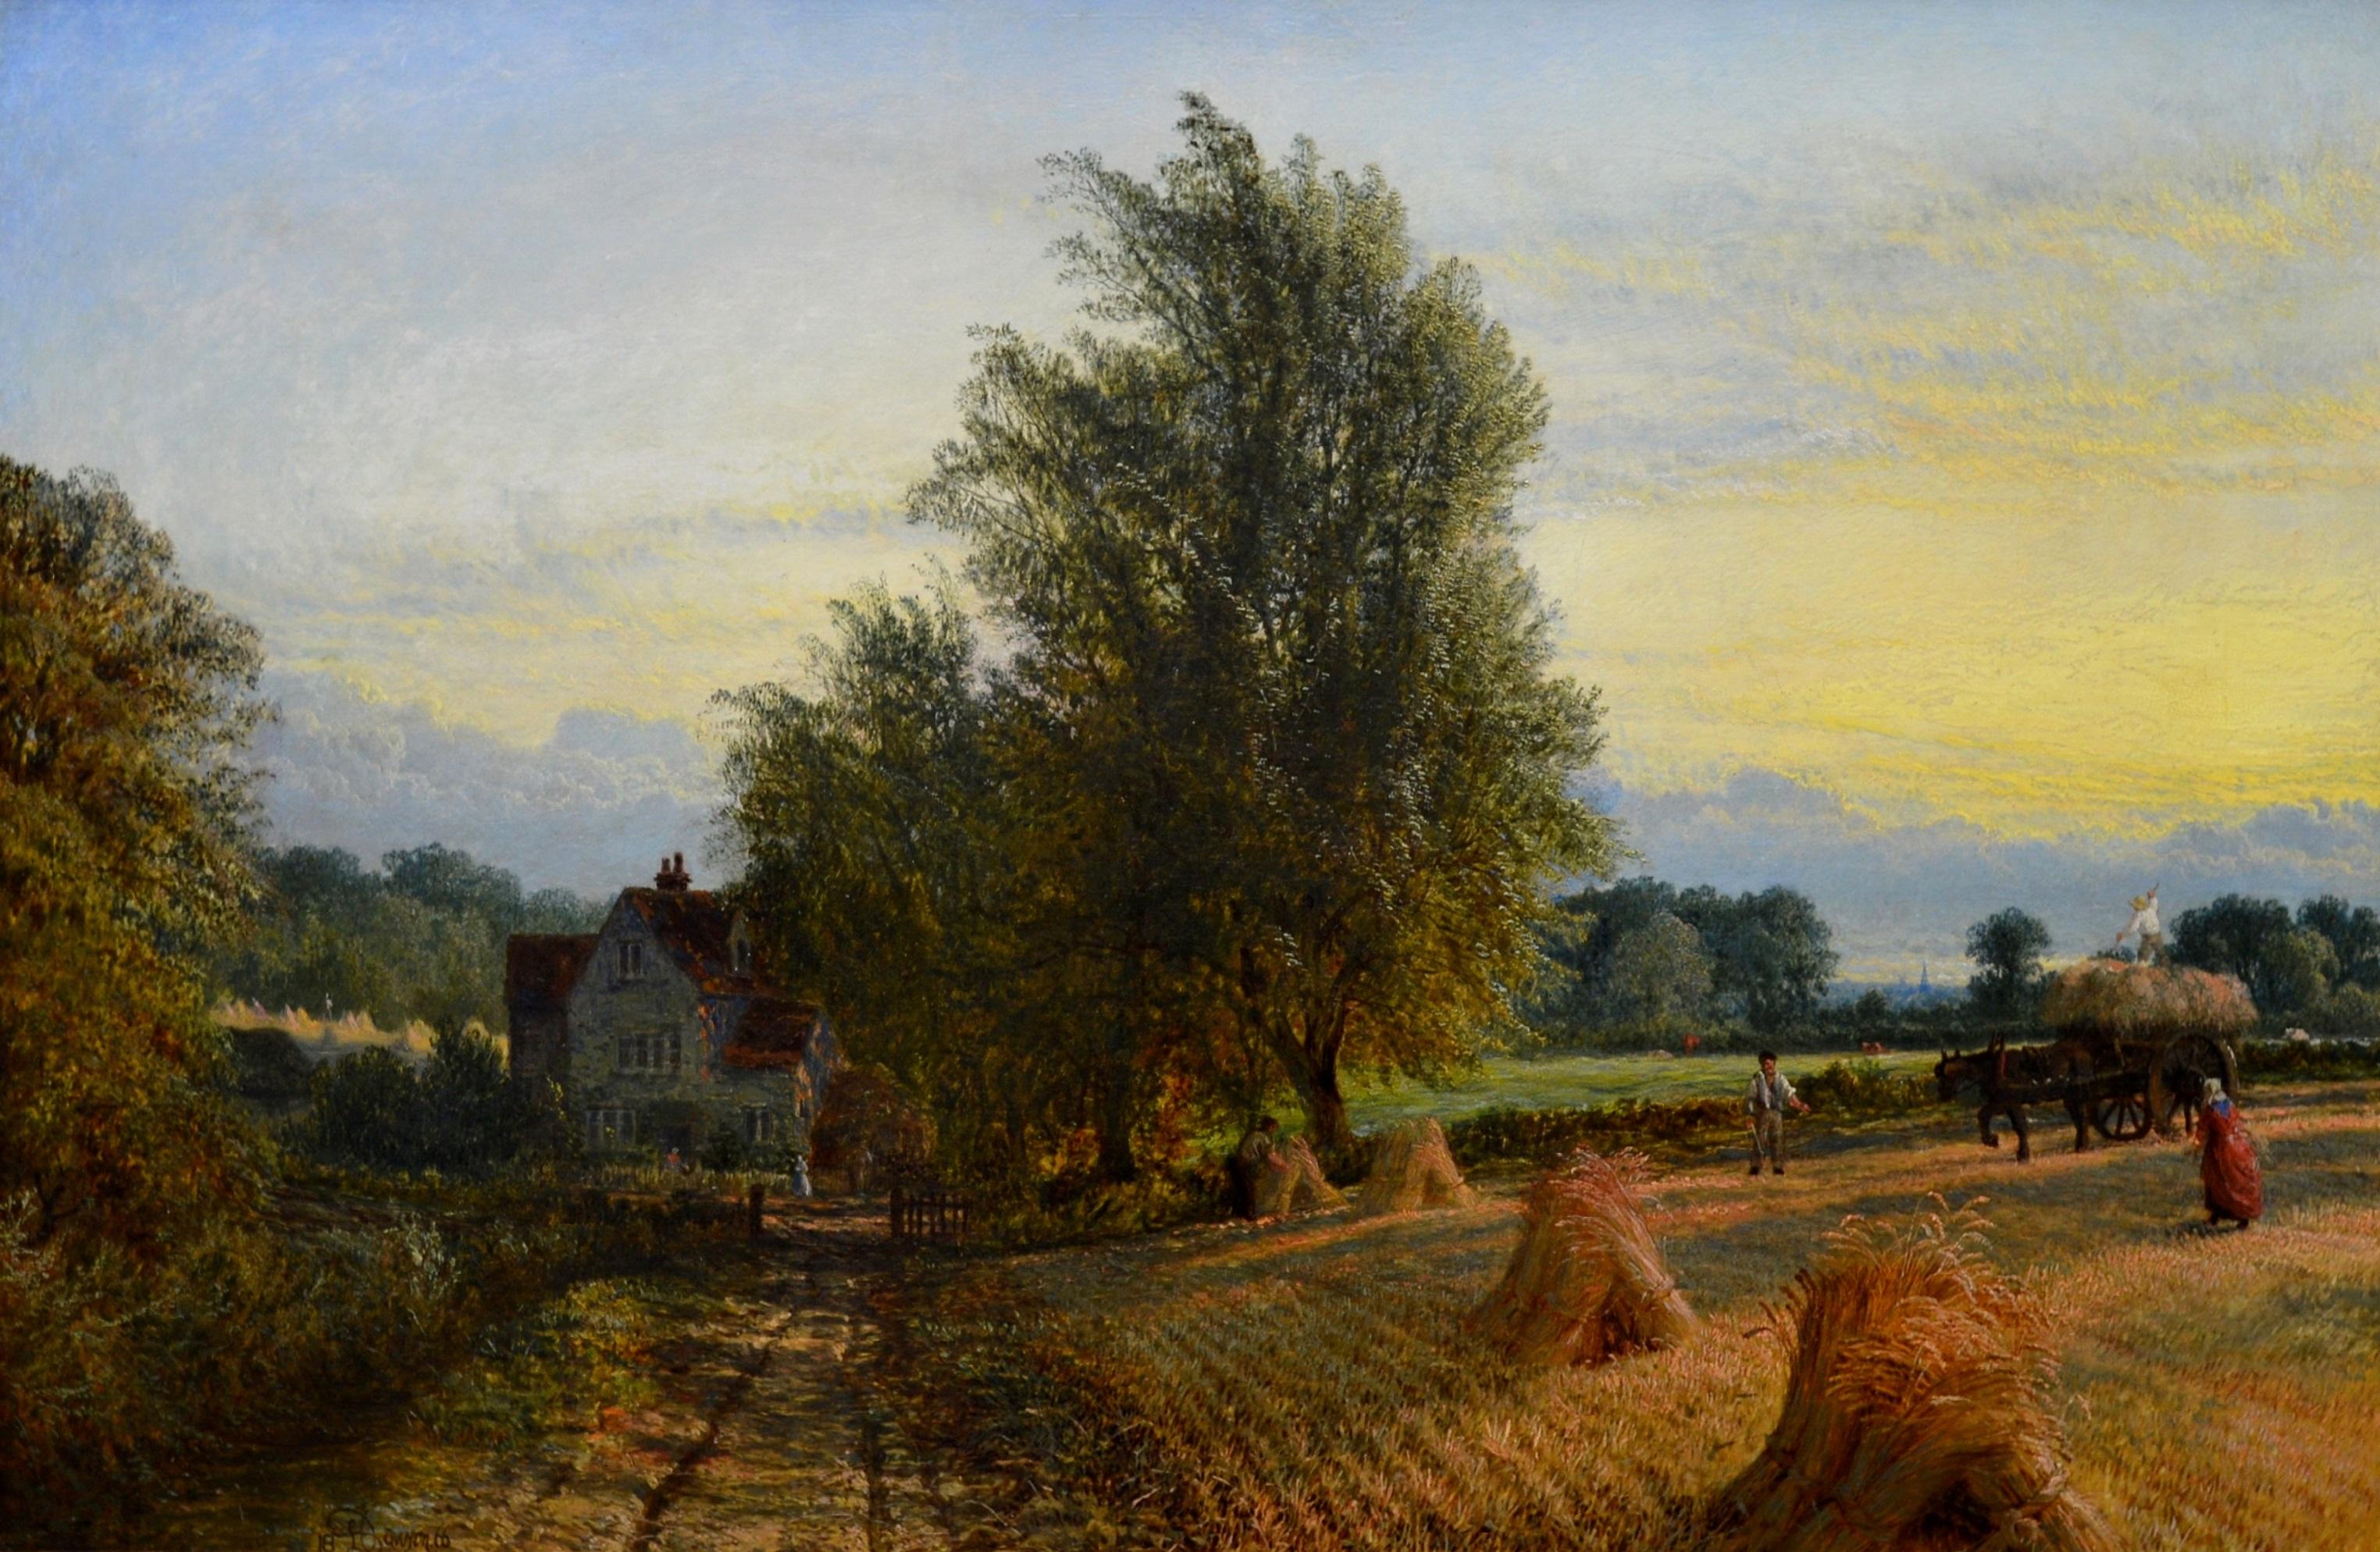 The Harvest - 19th Century English Summer Sunset Landscape Oil Painting 1